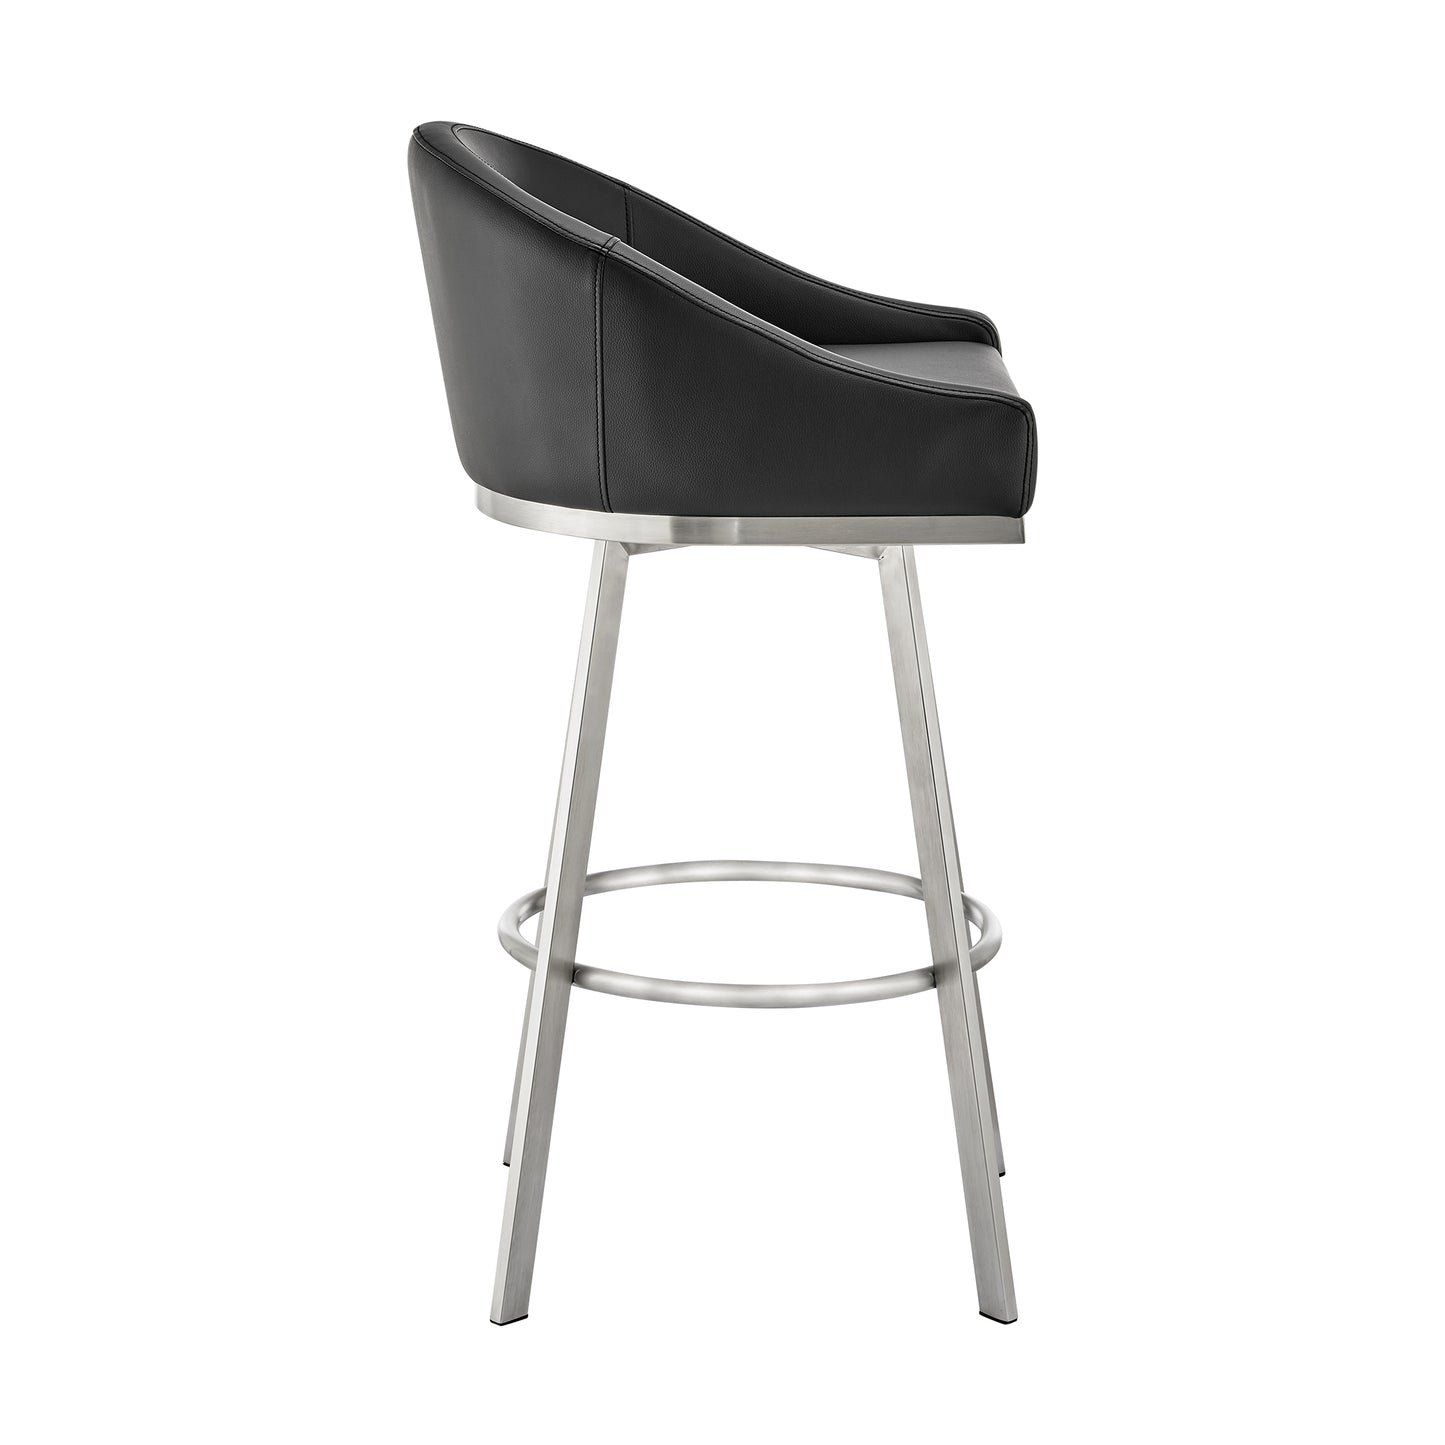 Eleanor 26" Swivel Counter Stool in Brushed Stainless Steel and Black Faux Leather